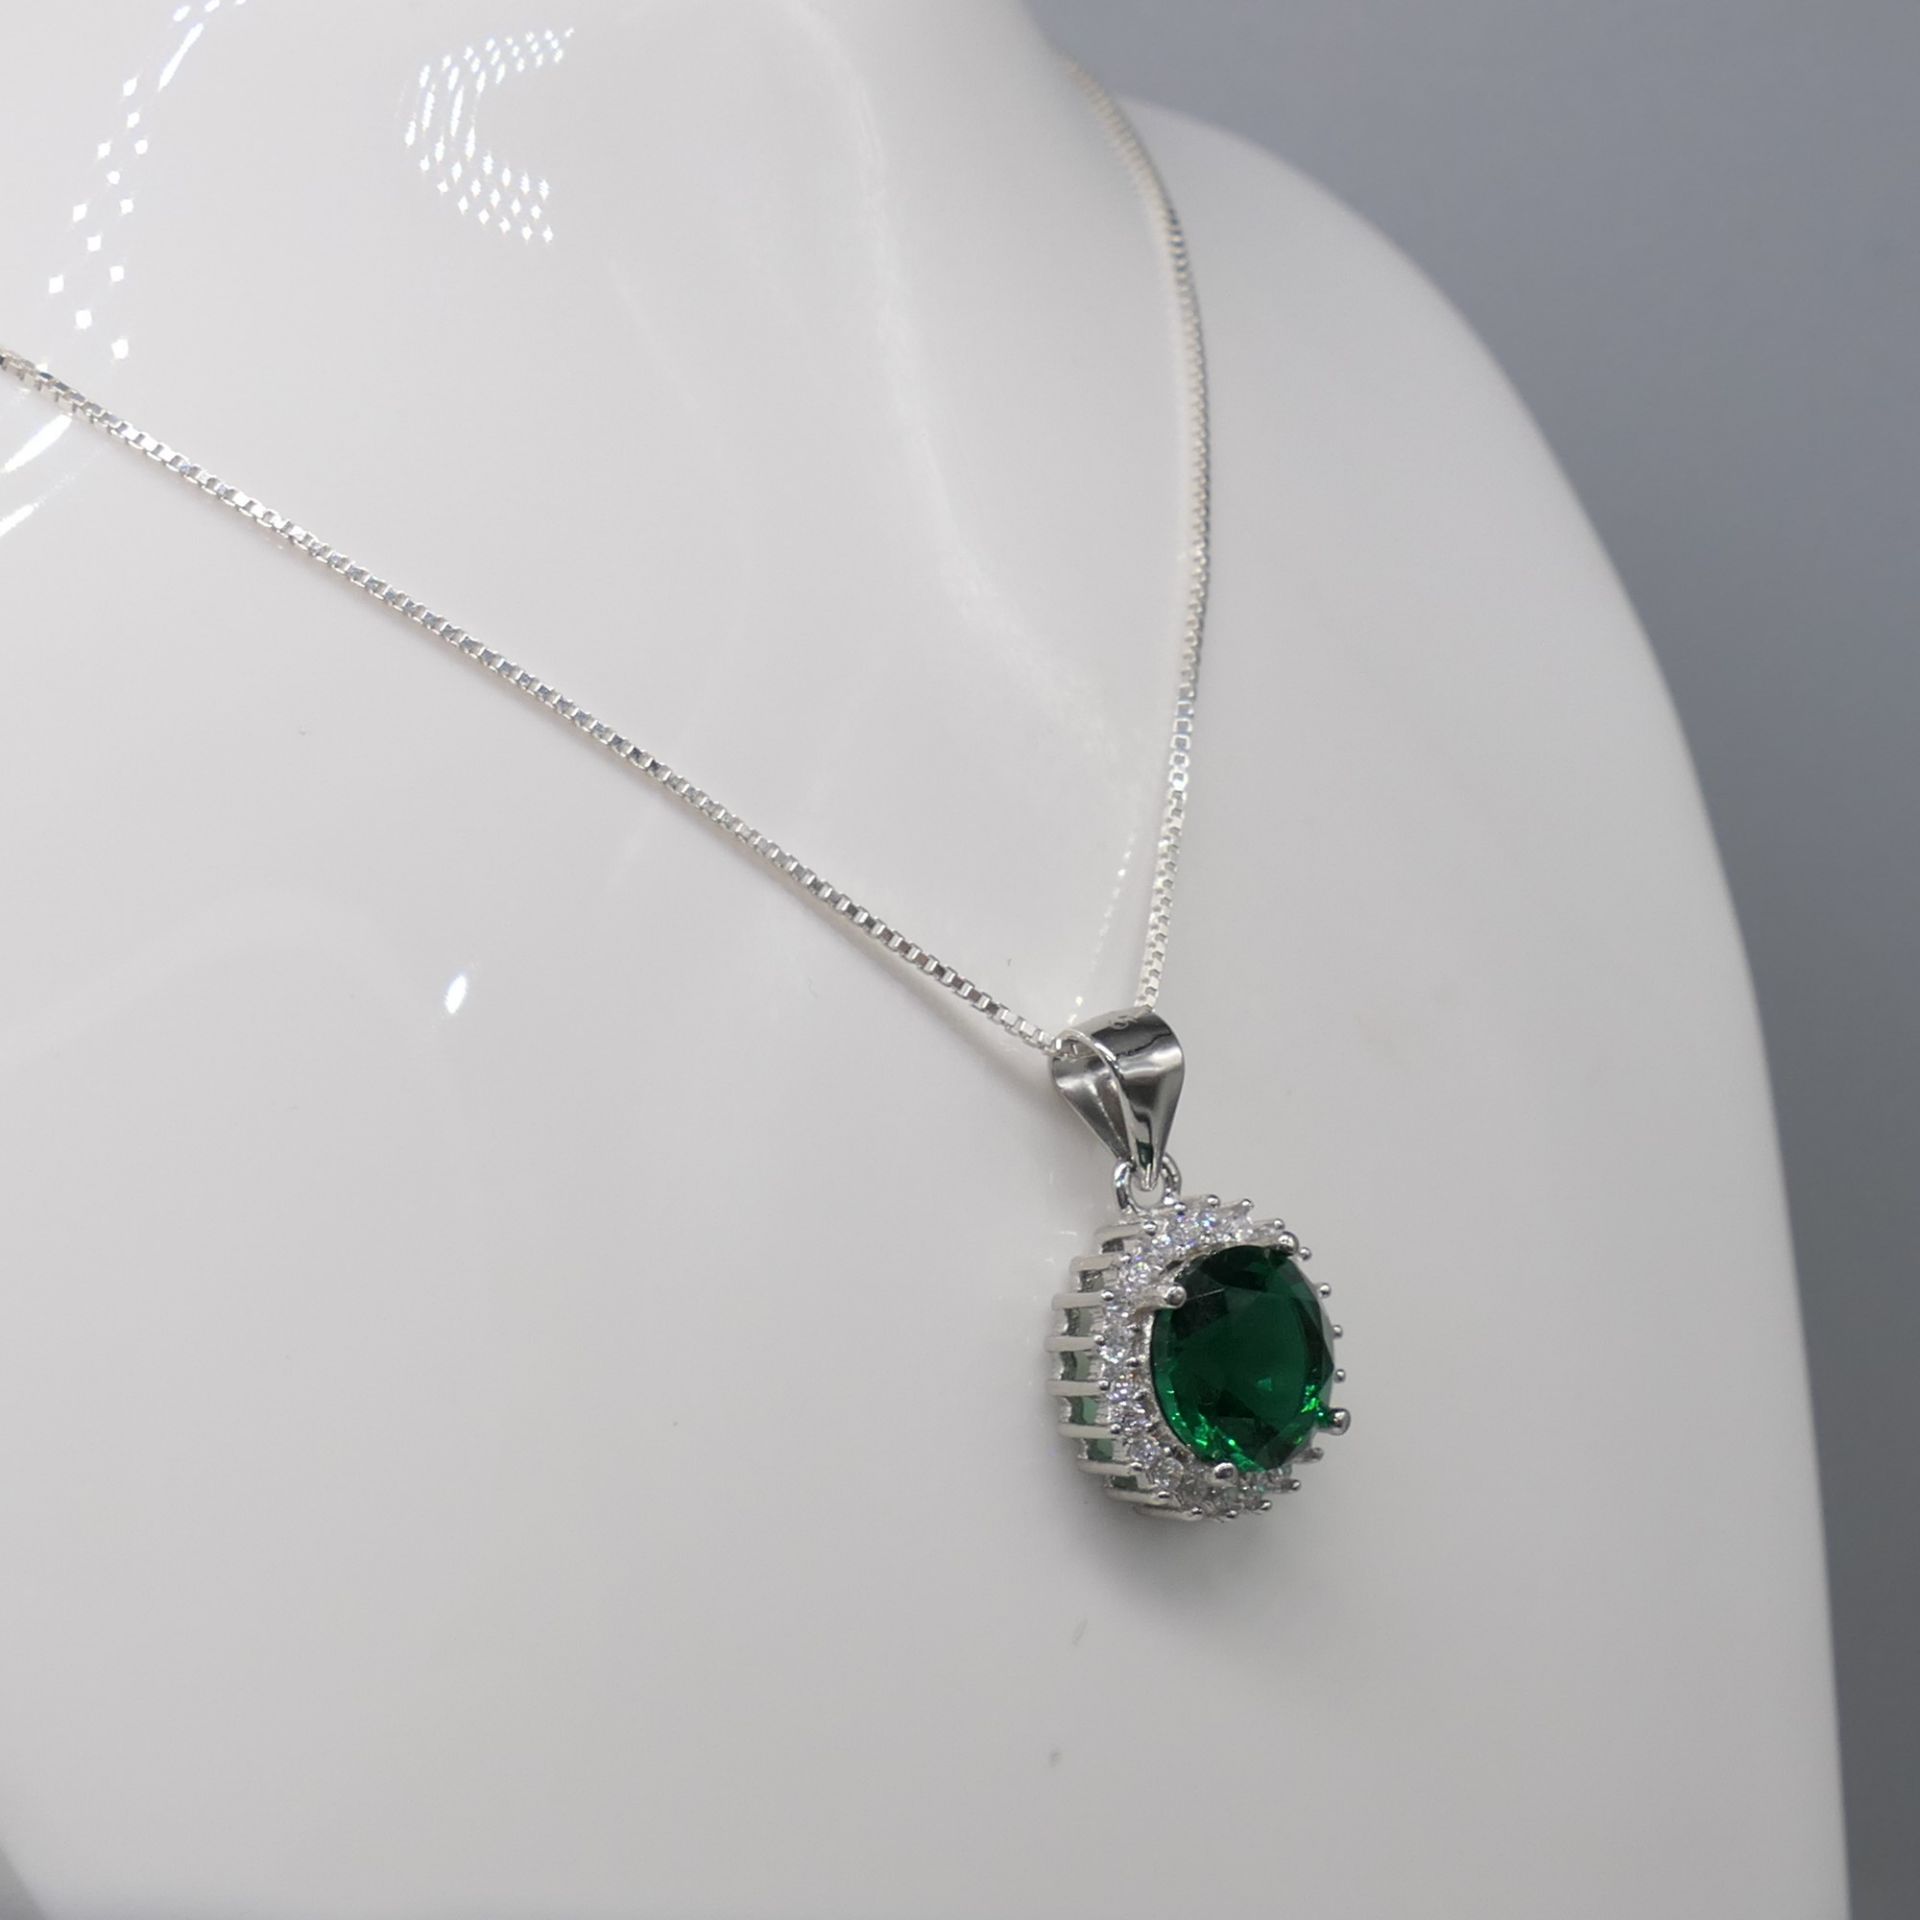 Green Gem Pendant and Chain In Sterling Silver - Image 6 of 6